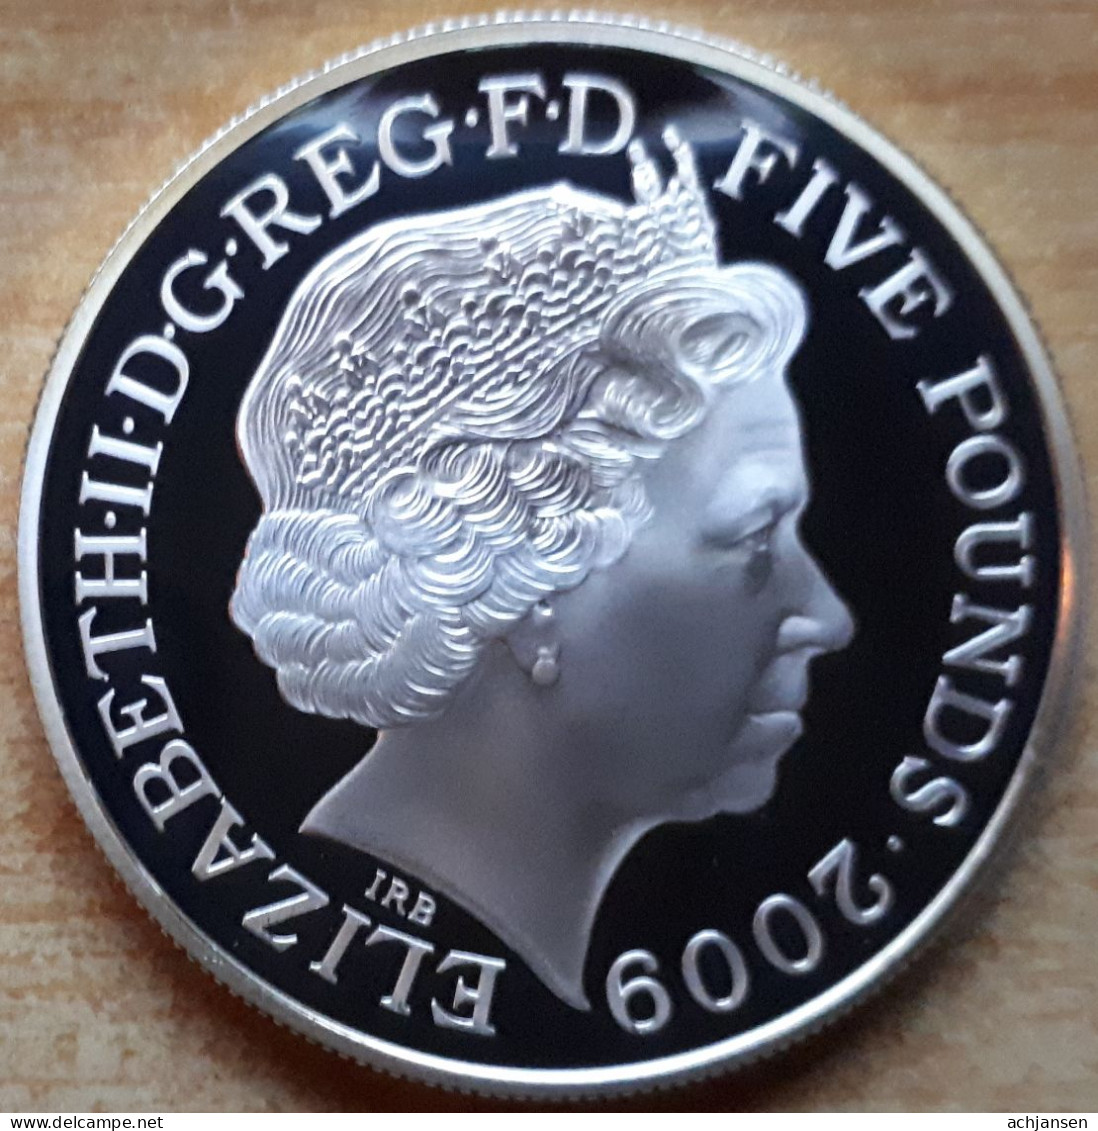 Great-Britain, 5 Pounds 2009 - Silver Proof - 5 Pounds